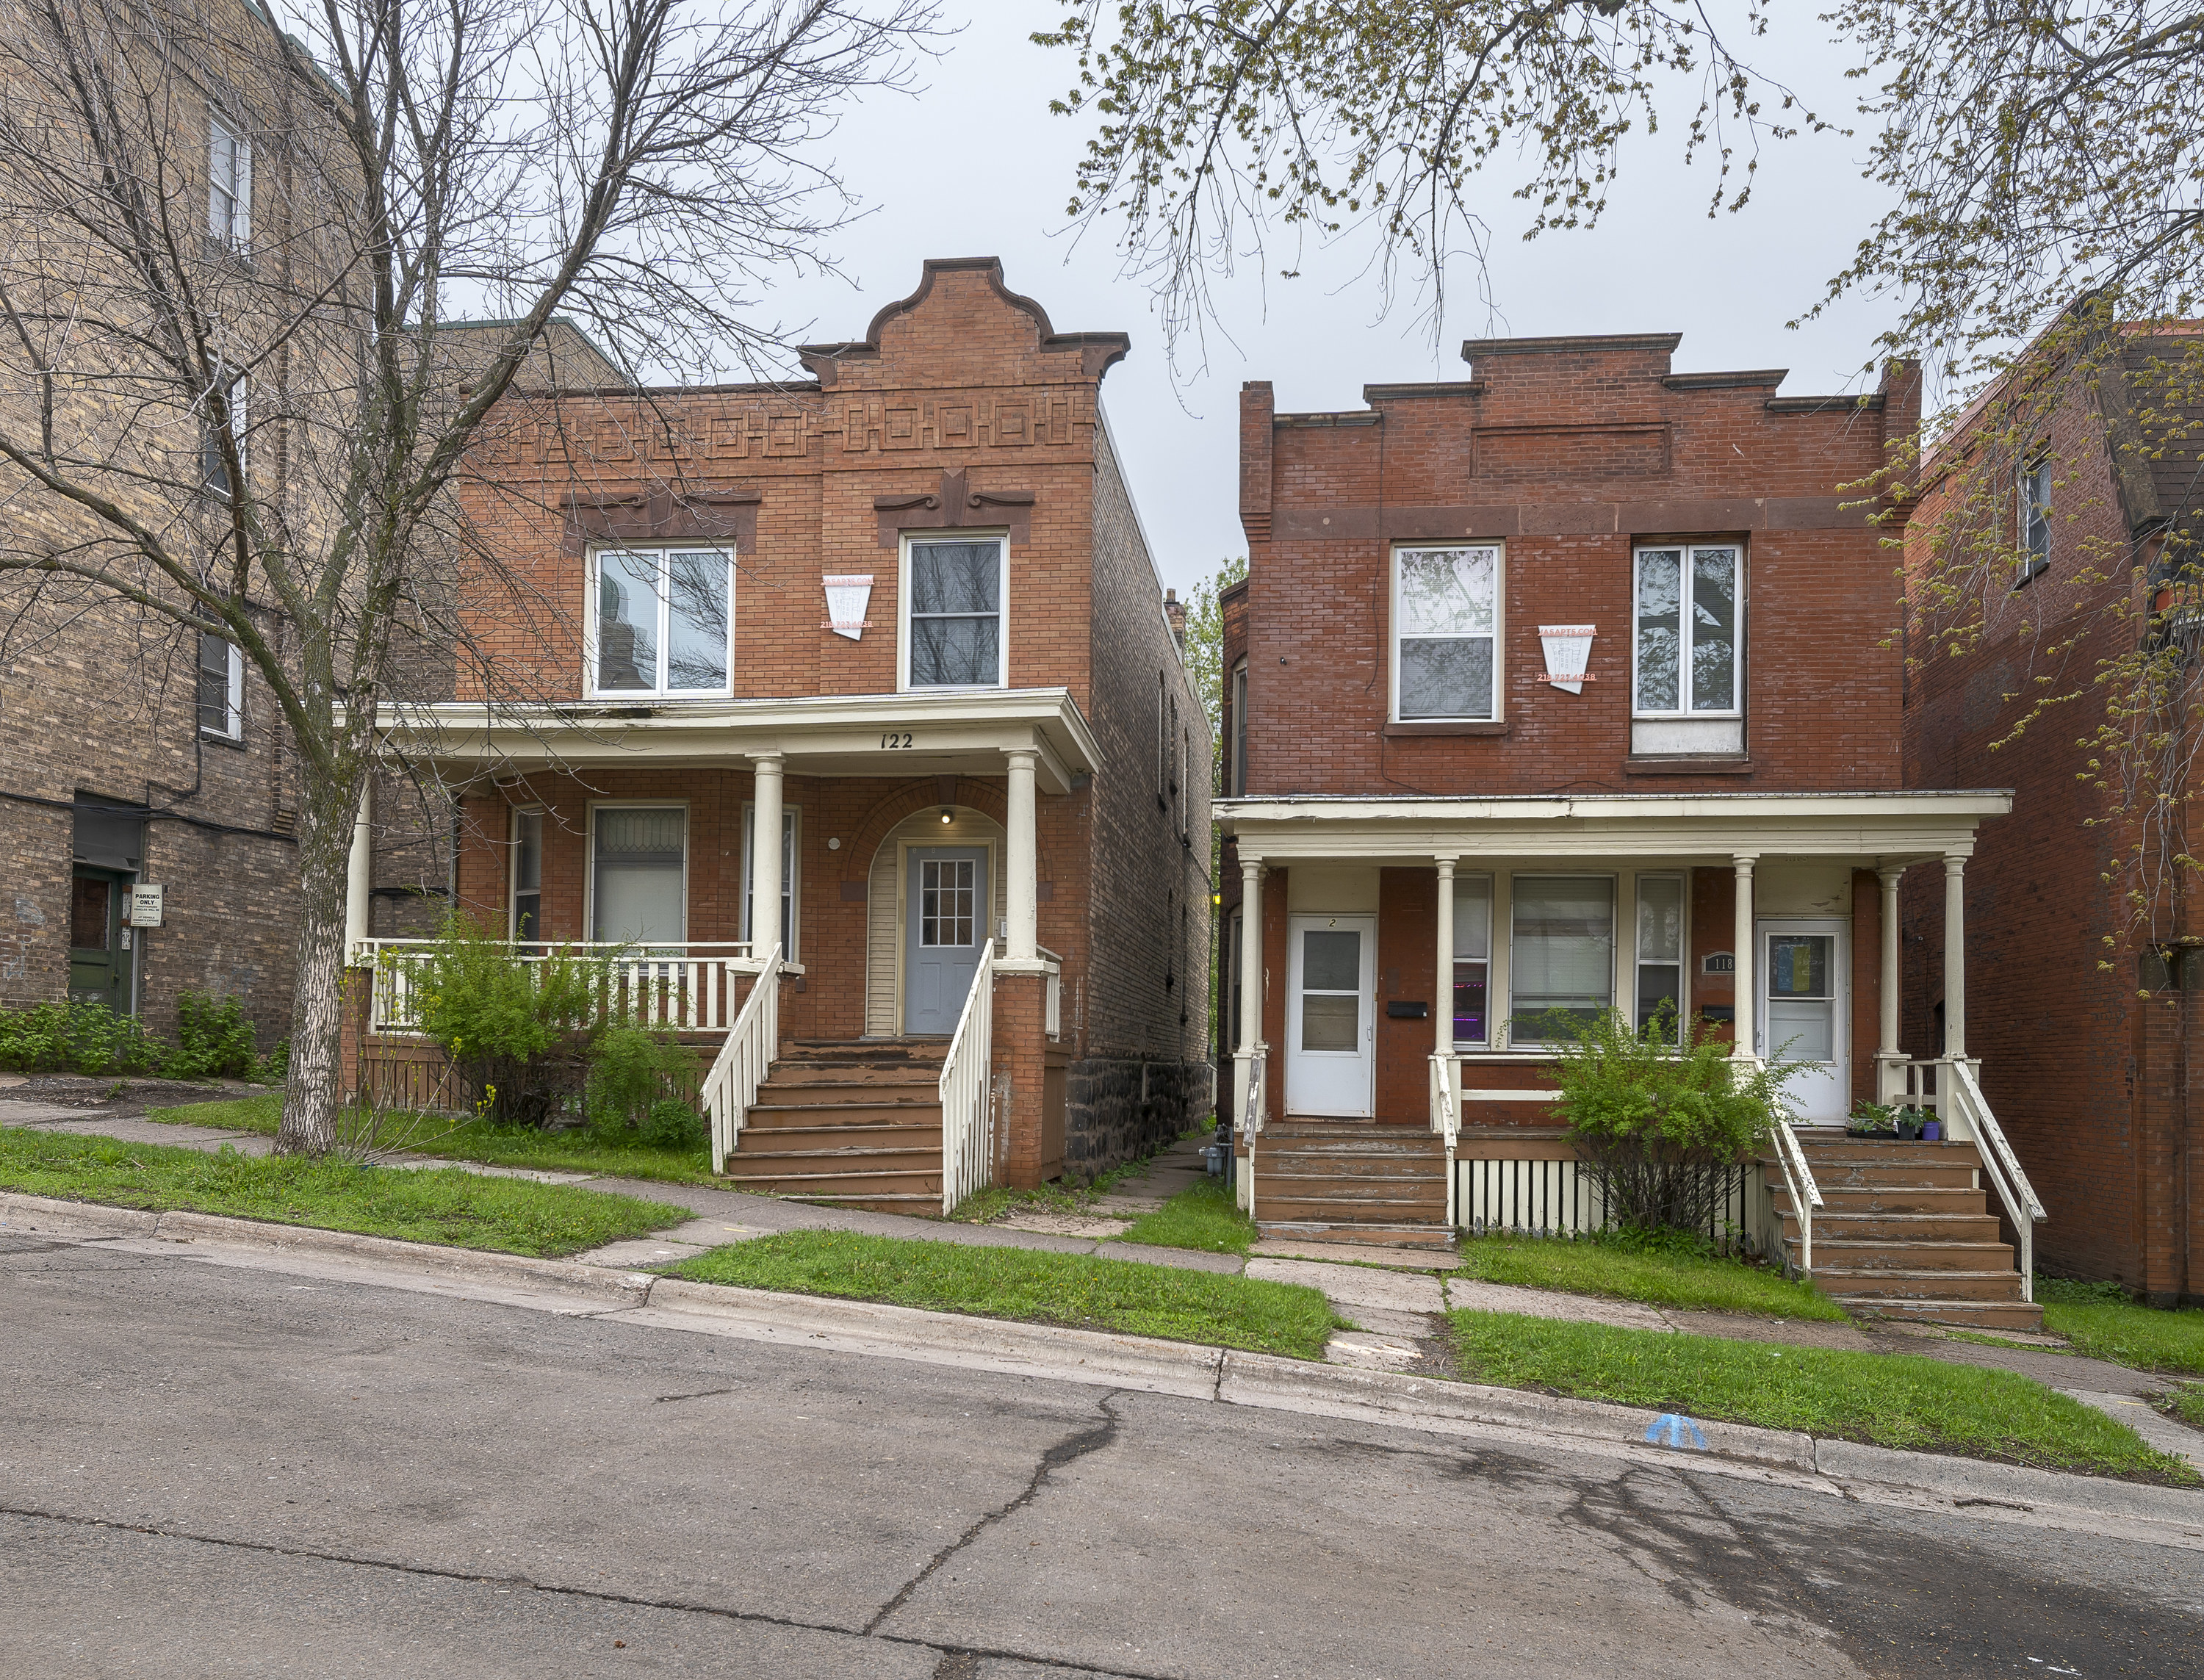 Historic duplexes in the Midwest